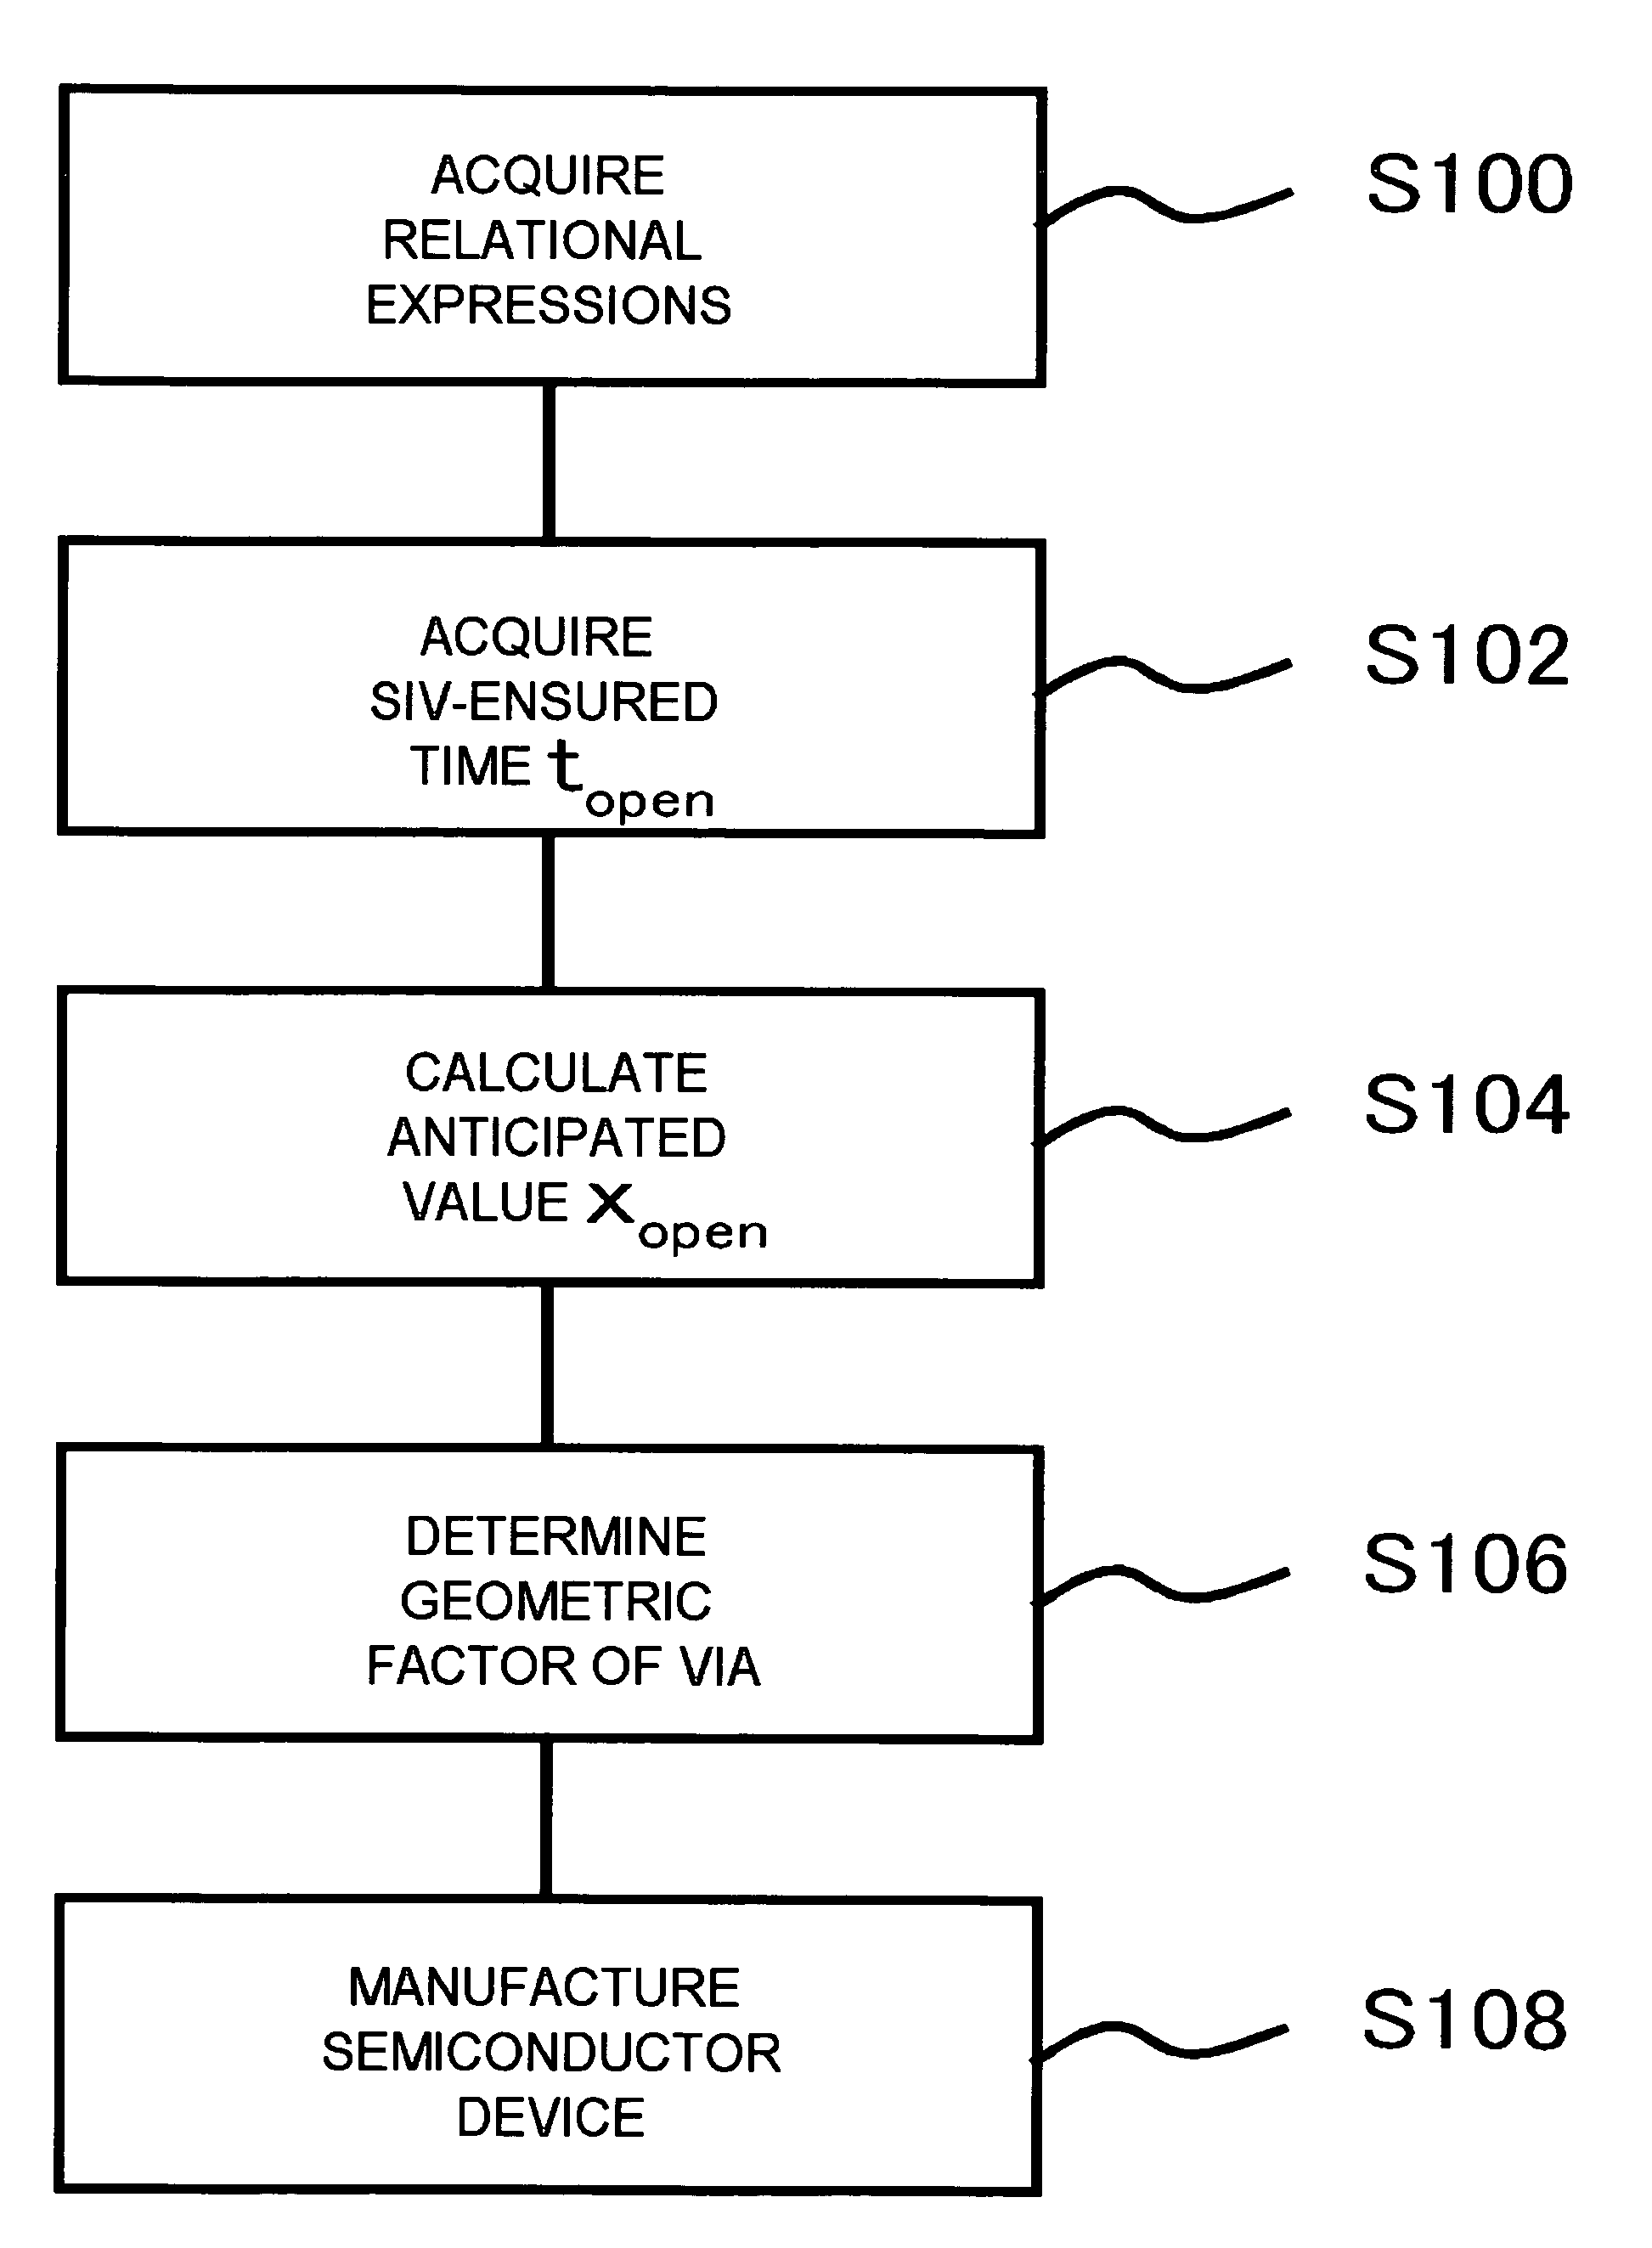 Methods for designing, evaluating and manufacturing semiconductor devices